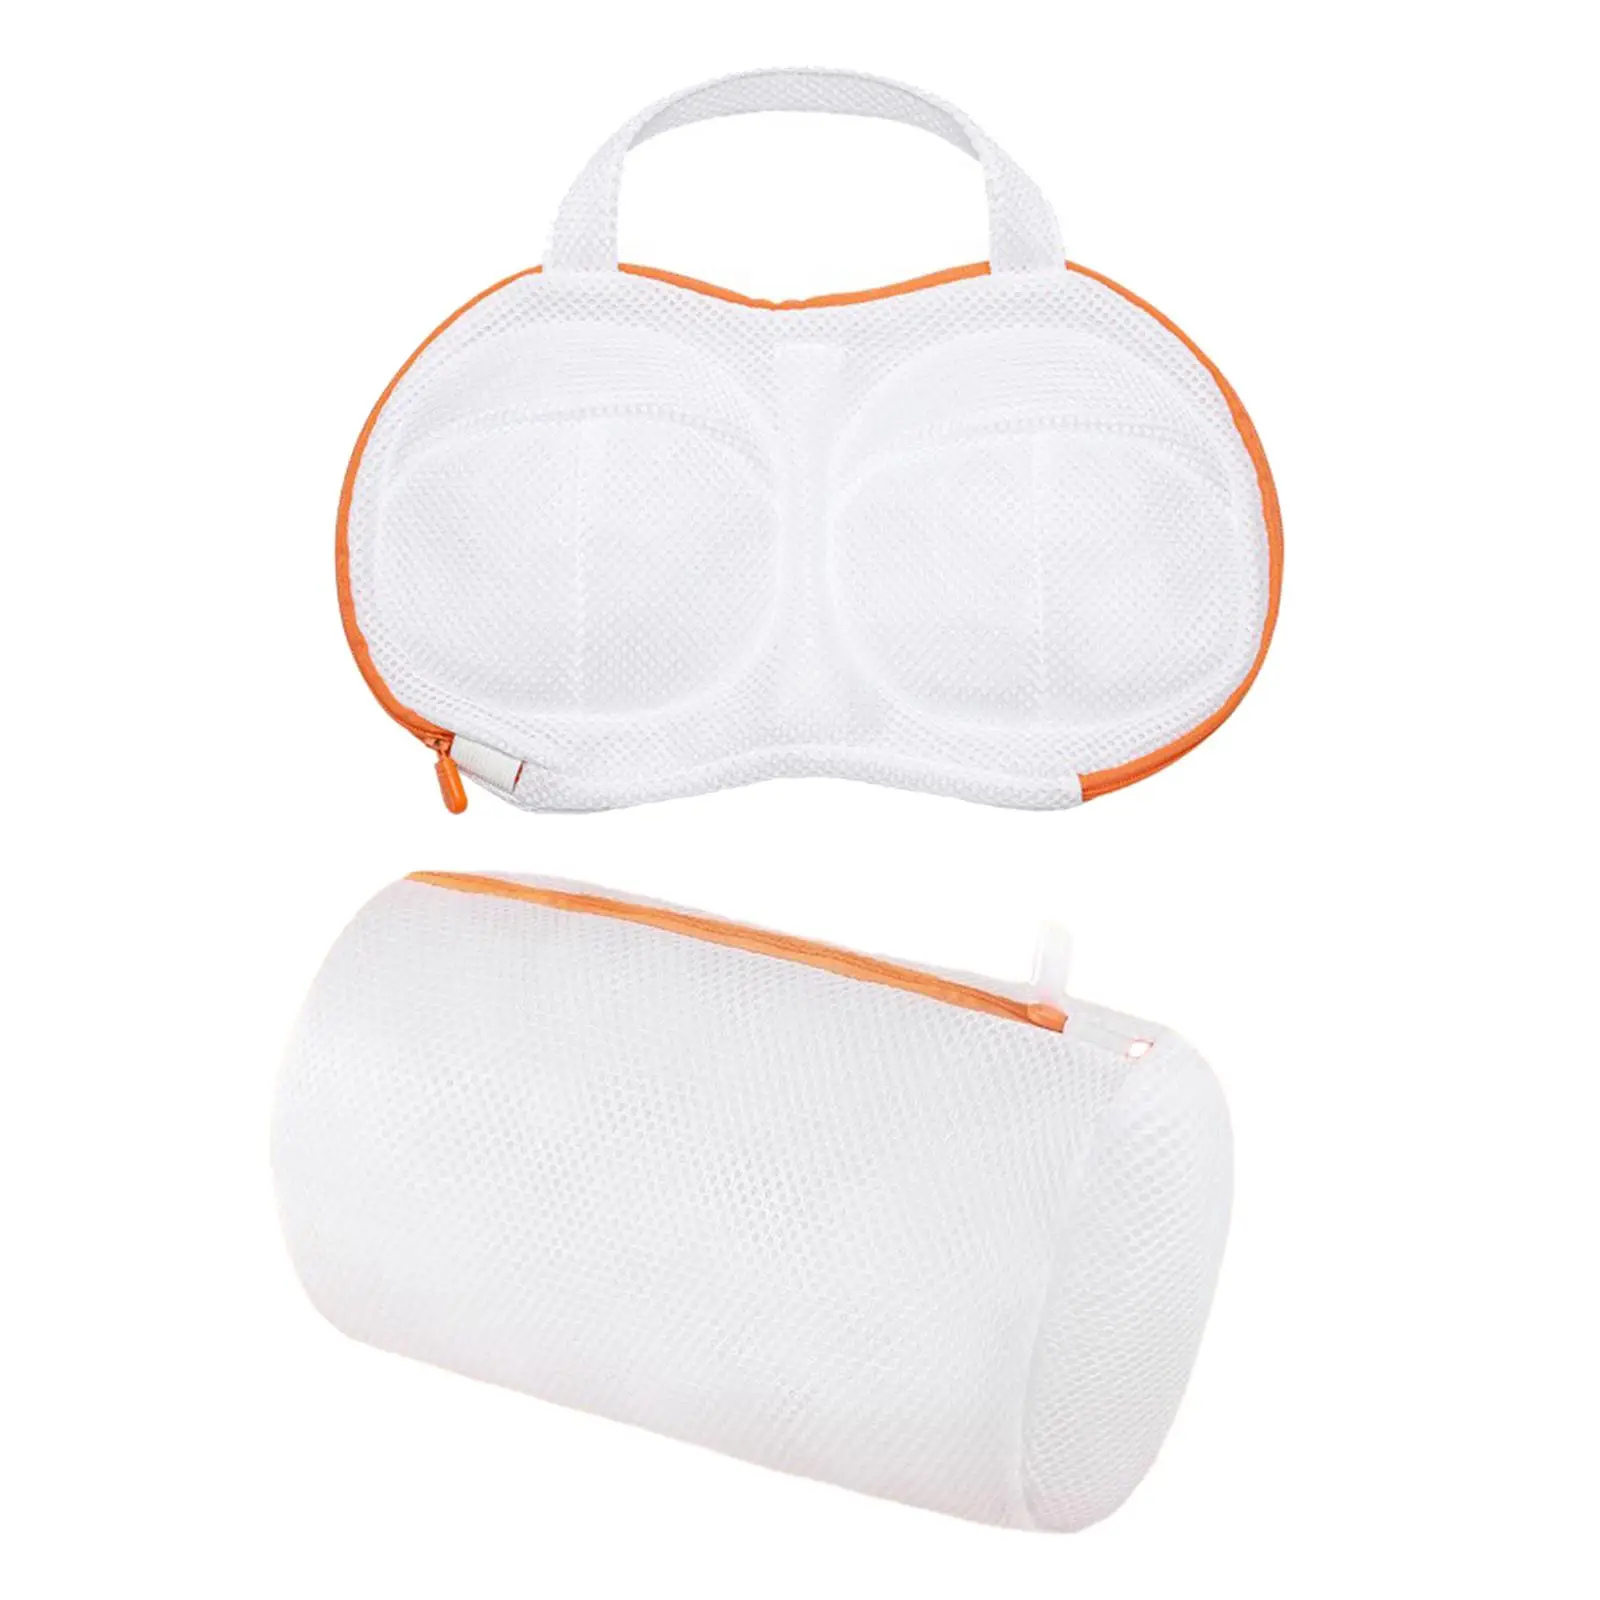 Mesh Laundry Bags Protective Portable for Delicate Washing Machine Wash Bag Travel Storage for Underwear Lingerie Bra Socks